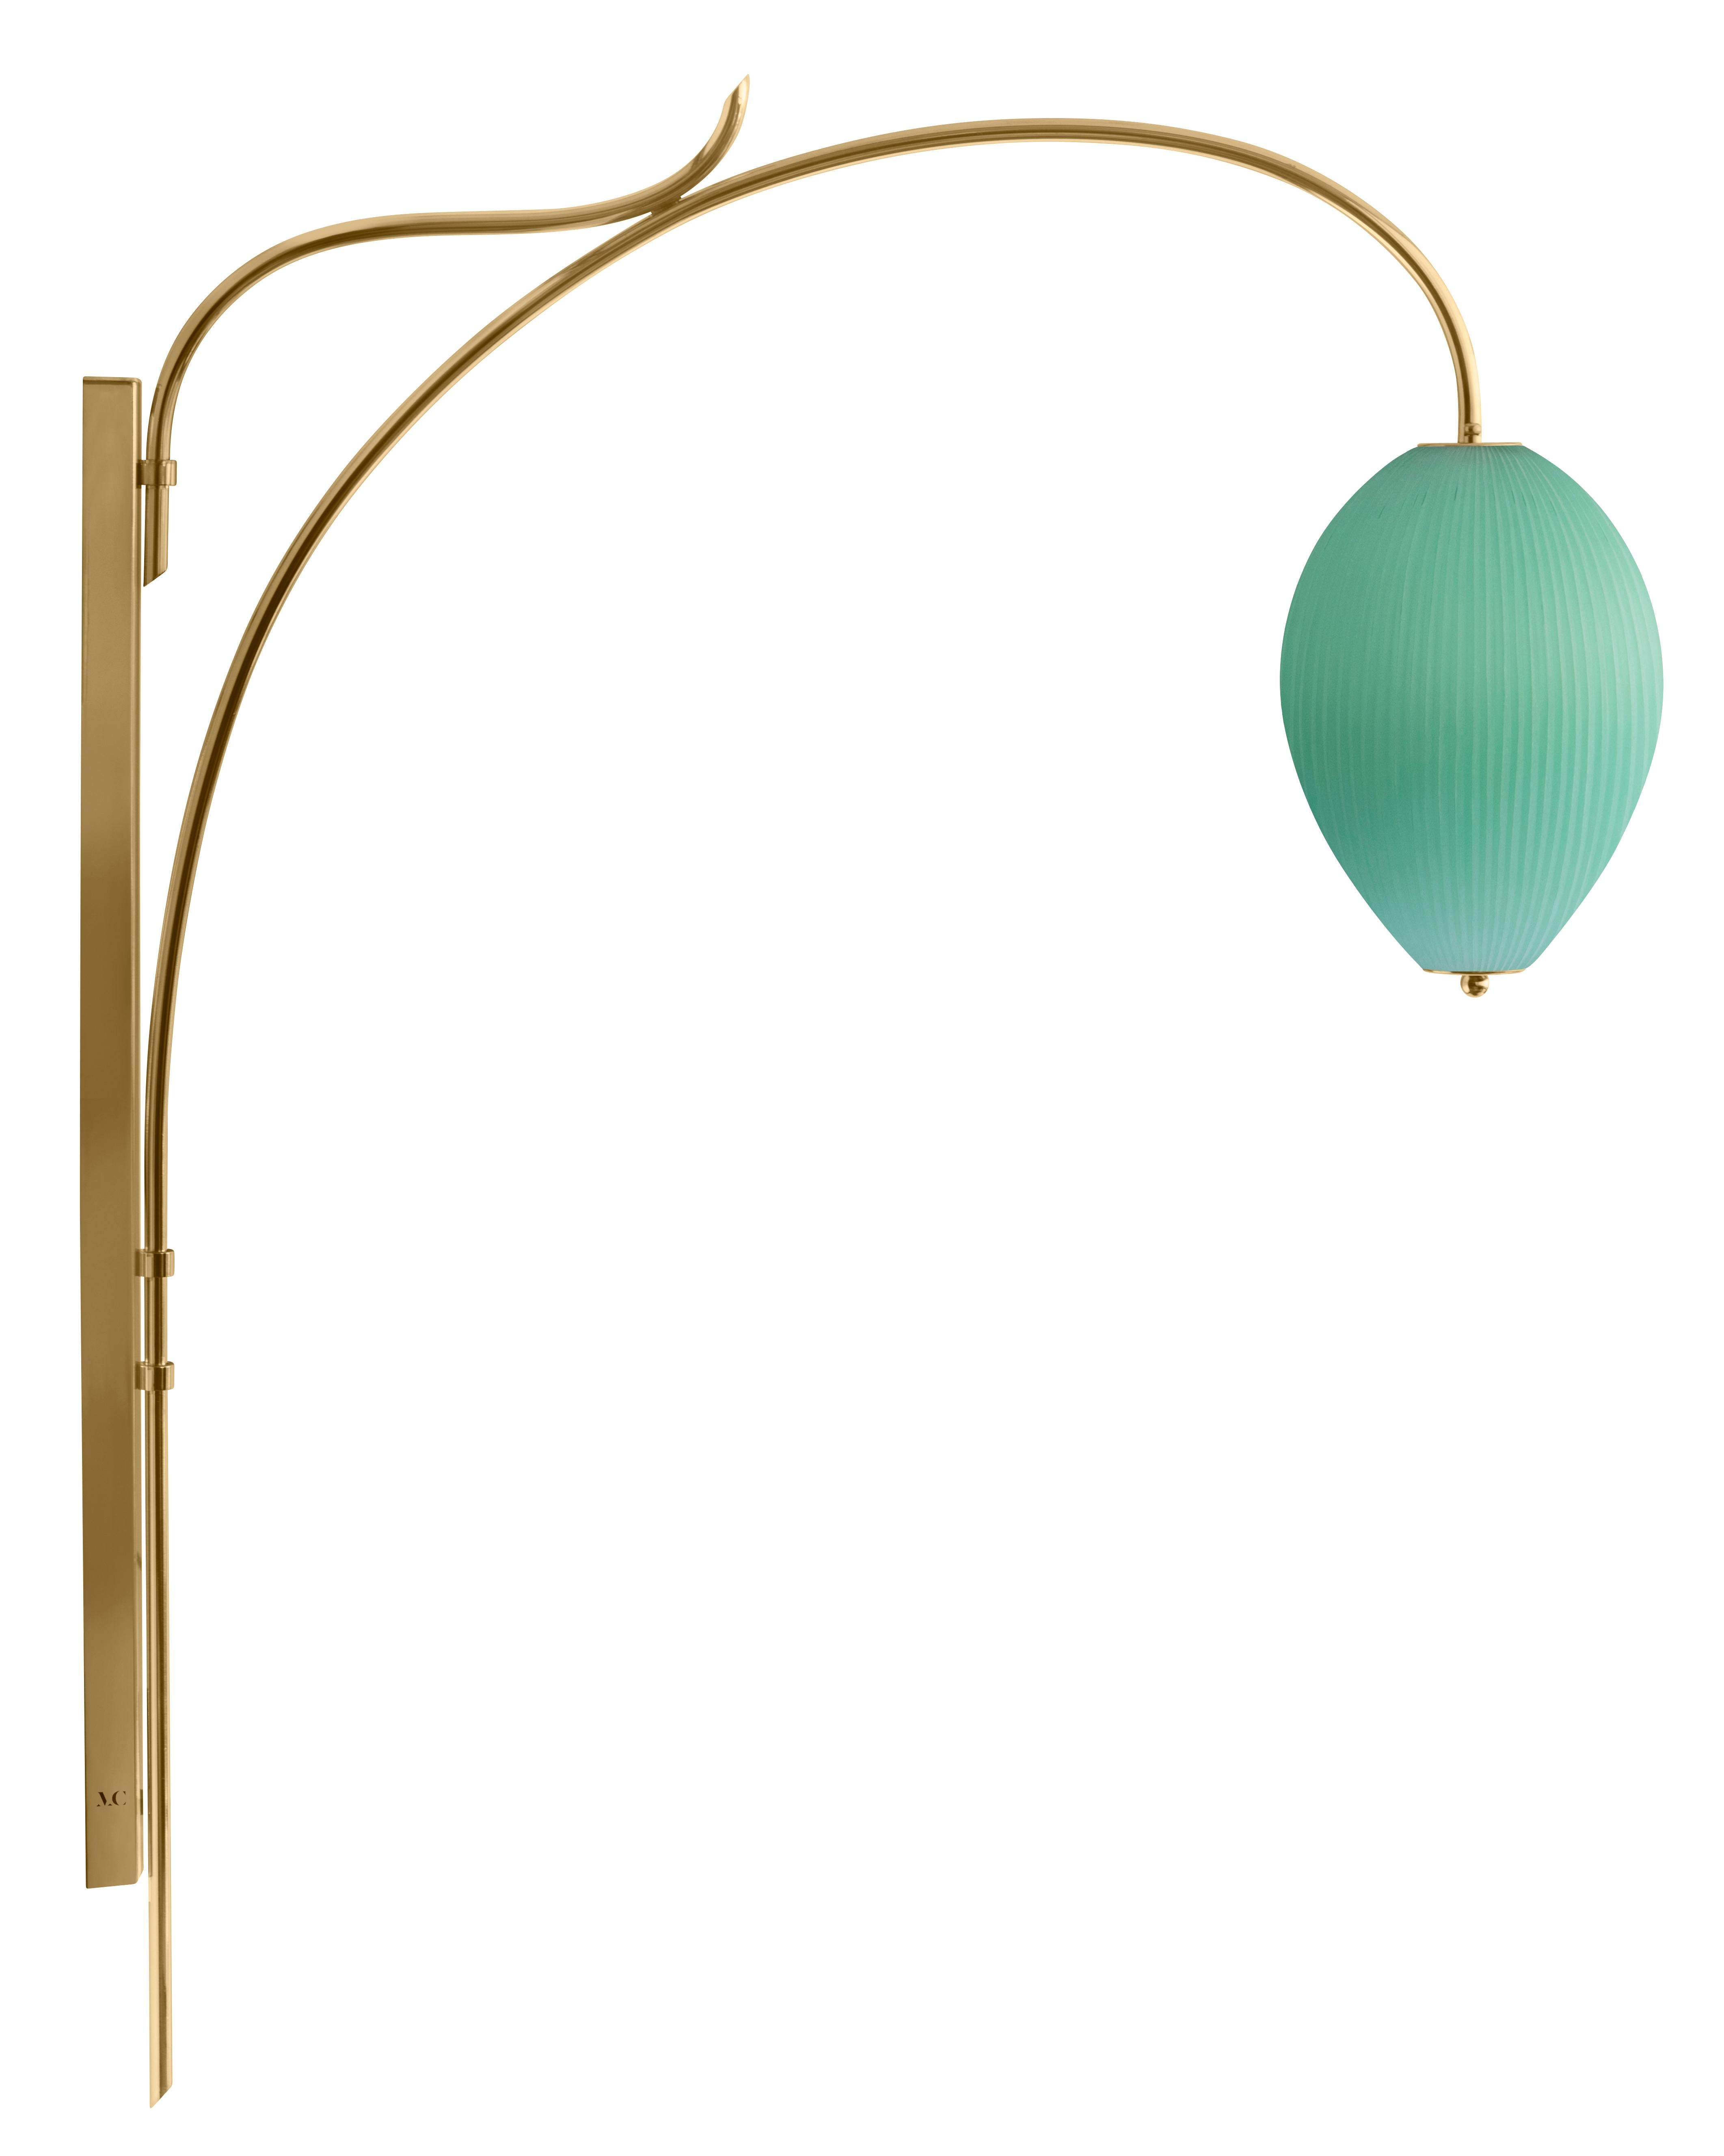 Wall lamp China 10 by Magic Circus Editions.
Dimensions: H 134 x W 25.2 x D 113.5 cm.
Materials: brass, mouth blown glass sculpted with a diamond saw.
Colour: opal grey.

Available finishes: brass, nickel.
Available colours: enamel soft white,